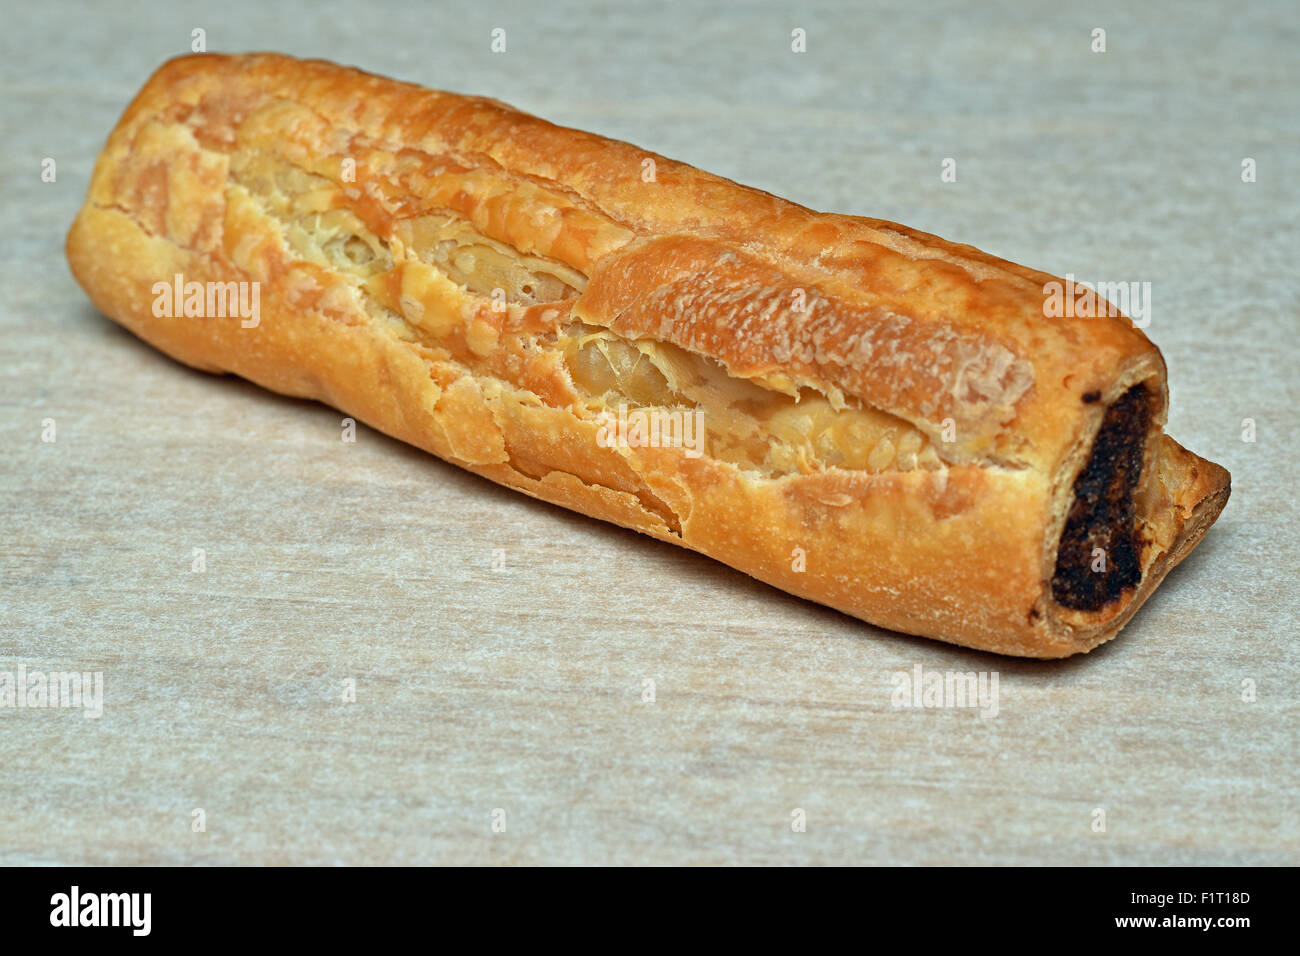 one crispy homemade sausage roll on a plain background Stock Photo